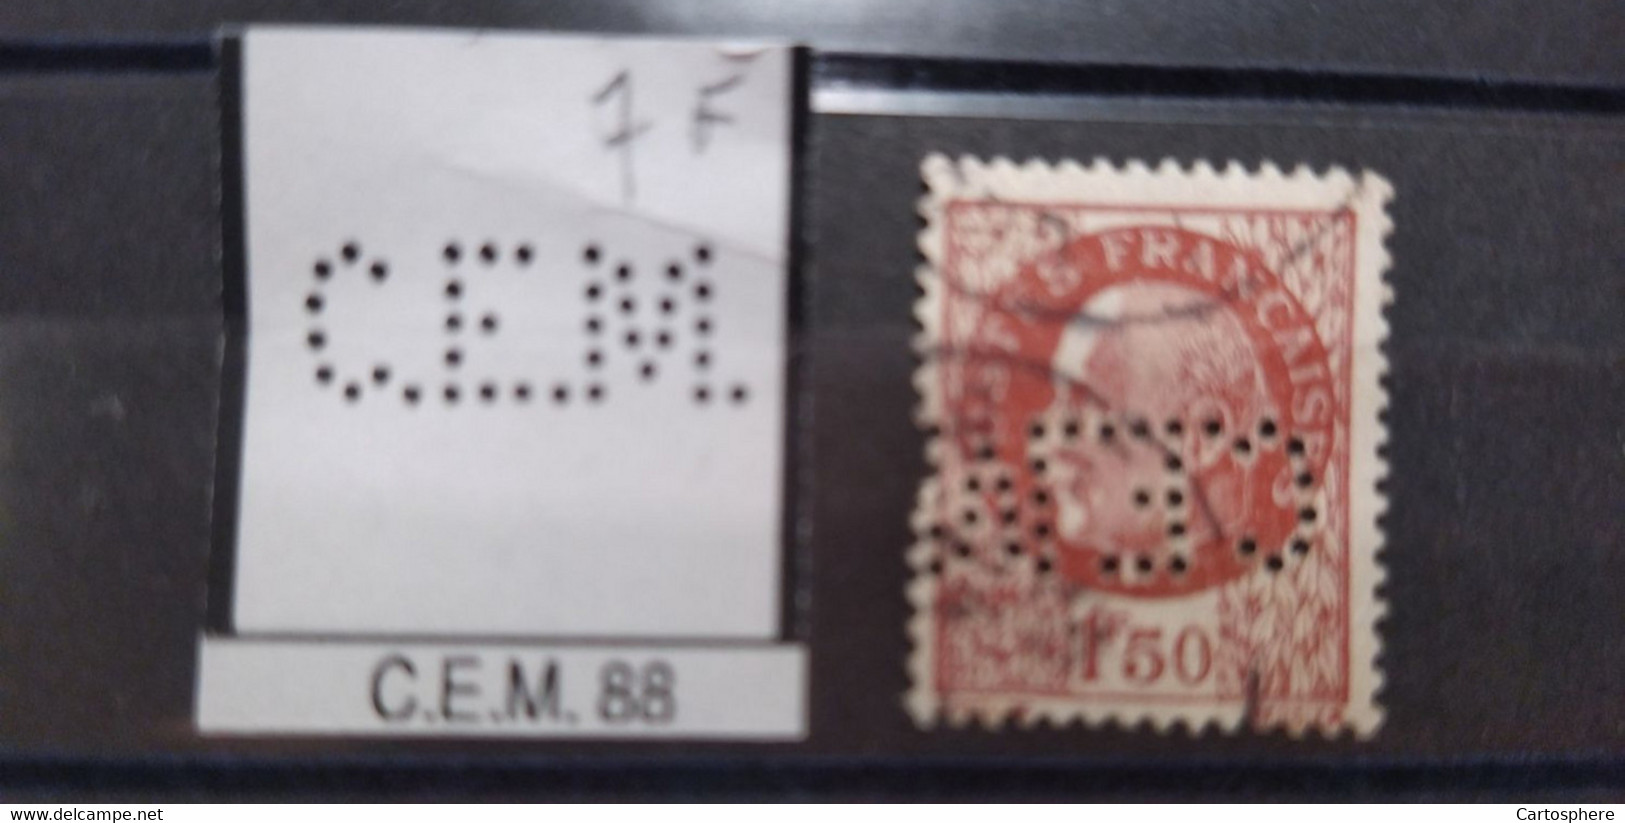 FRANCE TIMBRE C.E.M 88 INDICE 7 CEM 88  PERFORE PERFORES PERFIN PERFINS PERFO PERFORATION PERFORIERT - Used Stamps